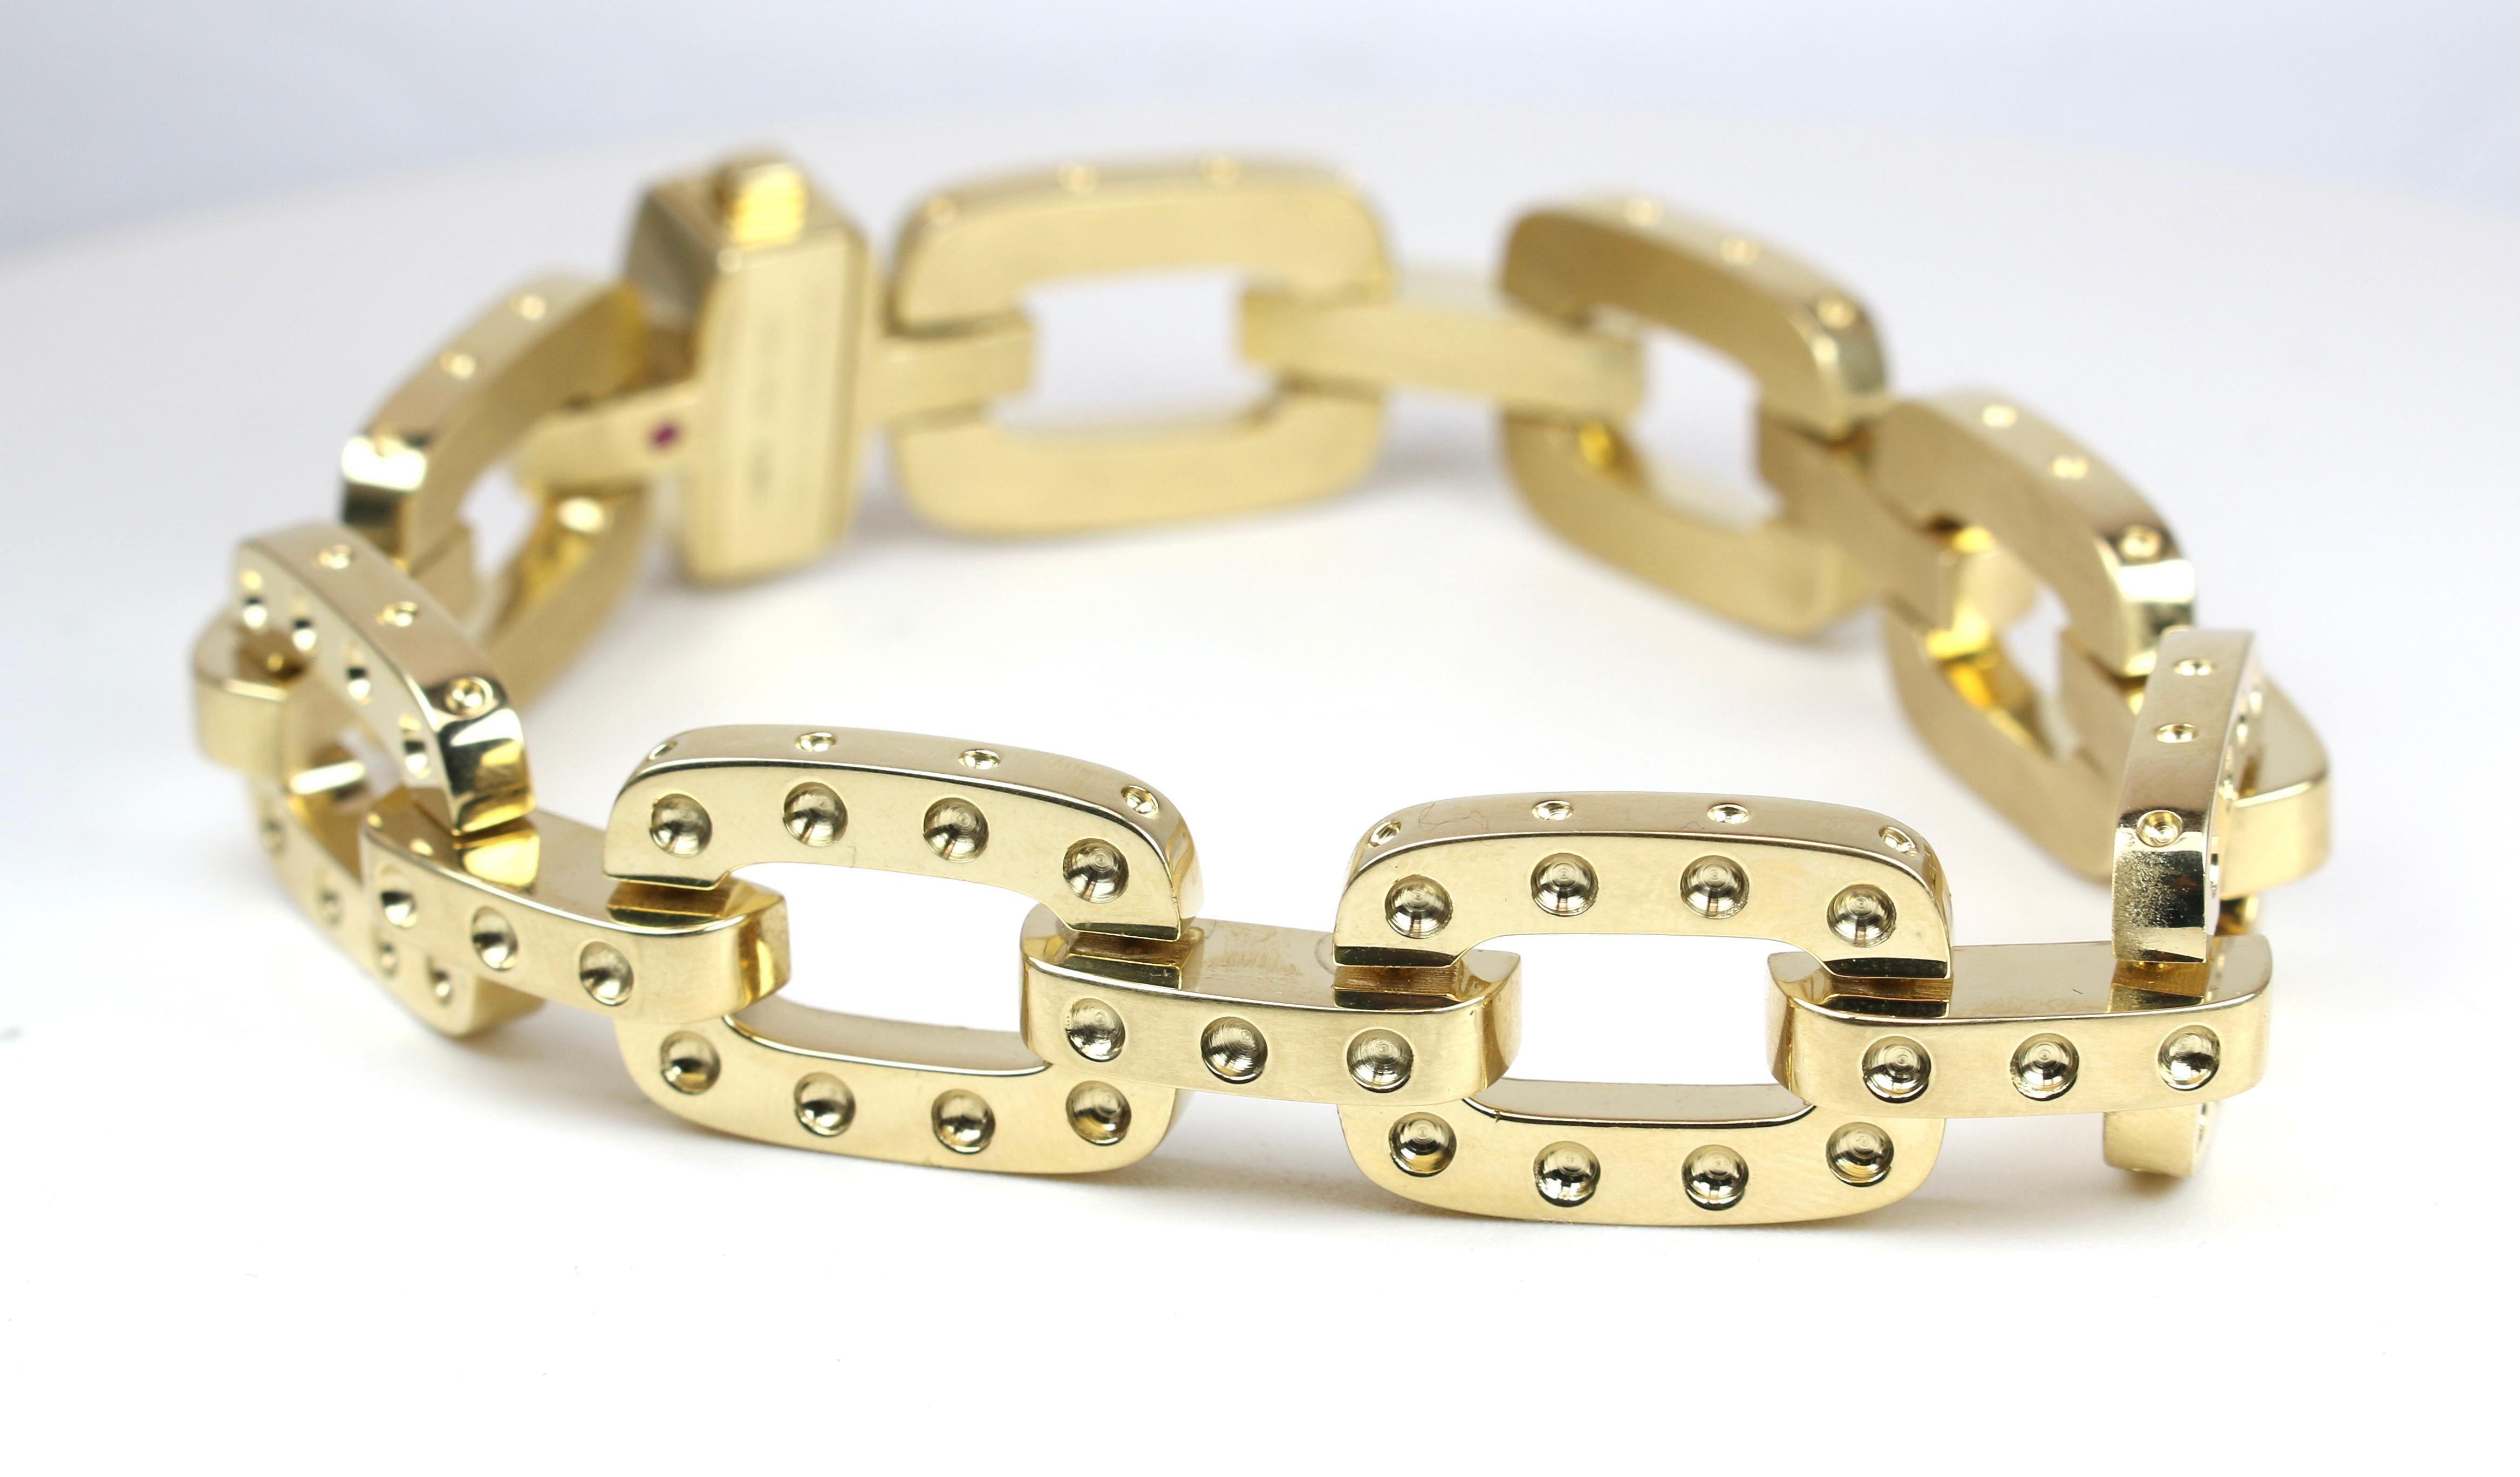 185 K Yellow Gold Roberto Coin Pois Mois Bracelet.  This stunning bracelet is 9 inches long and the size can be adjusted by removing links and would be considered a Unisex bracelet. 